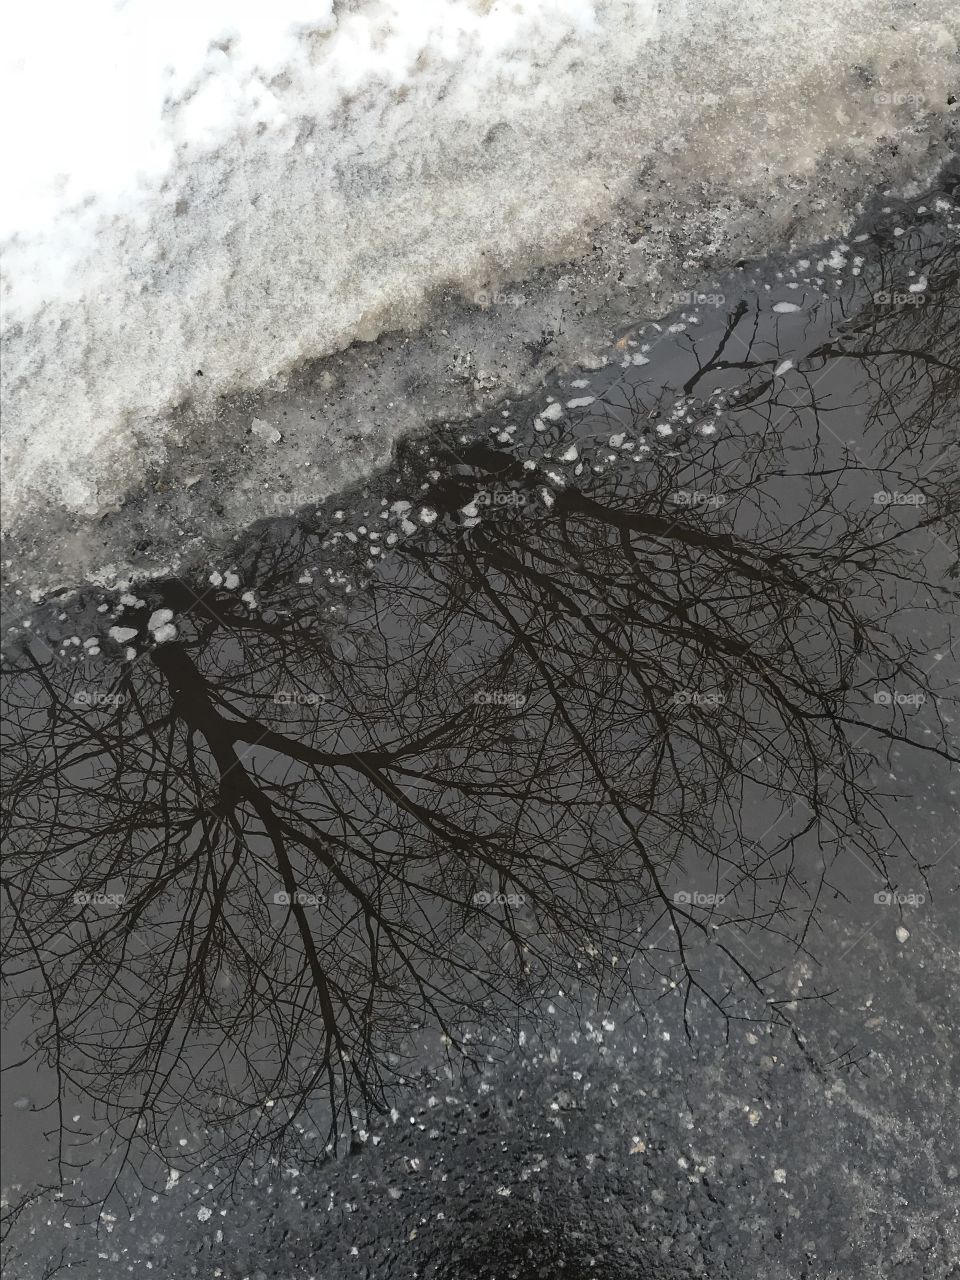 Pair of trees in winter reflected in a puddle as it snows. 